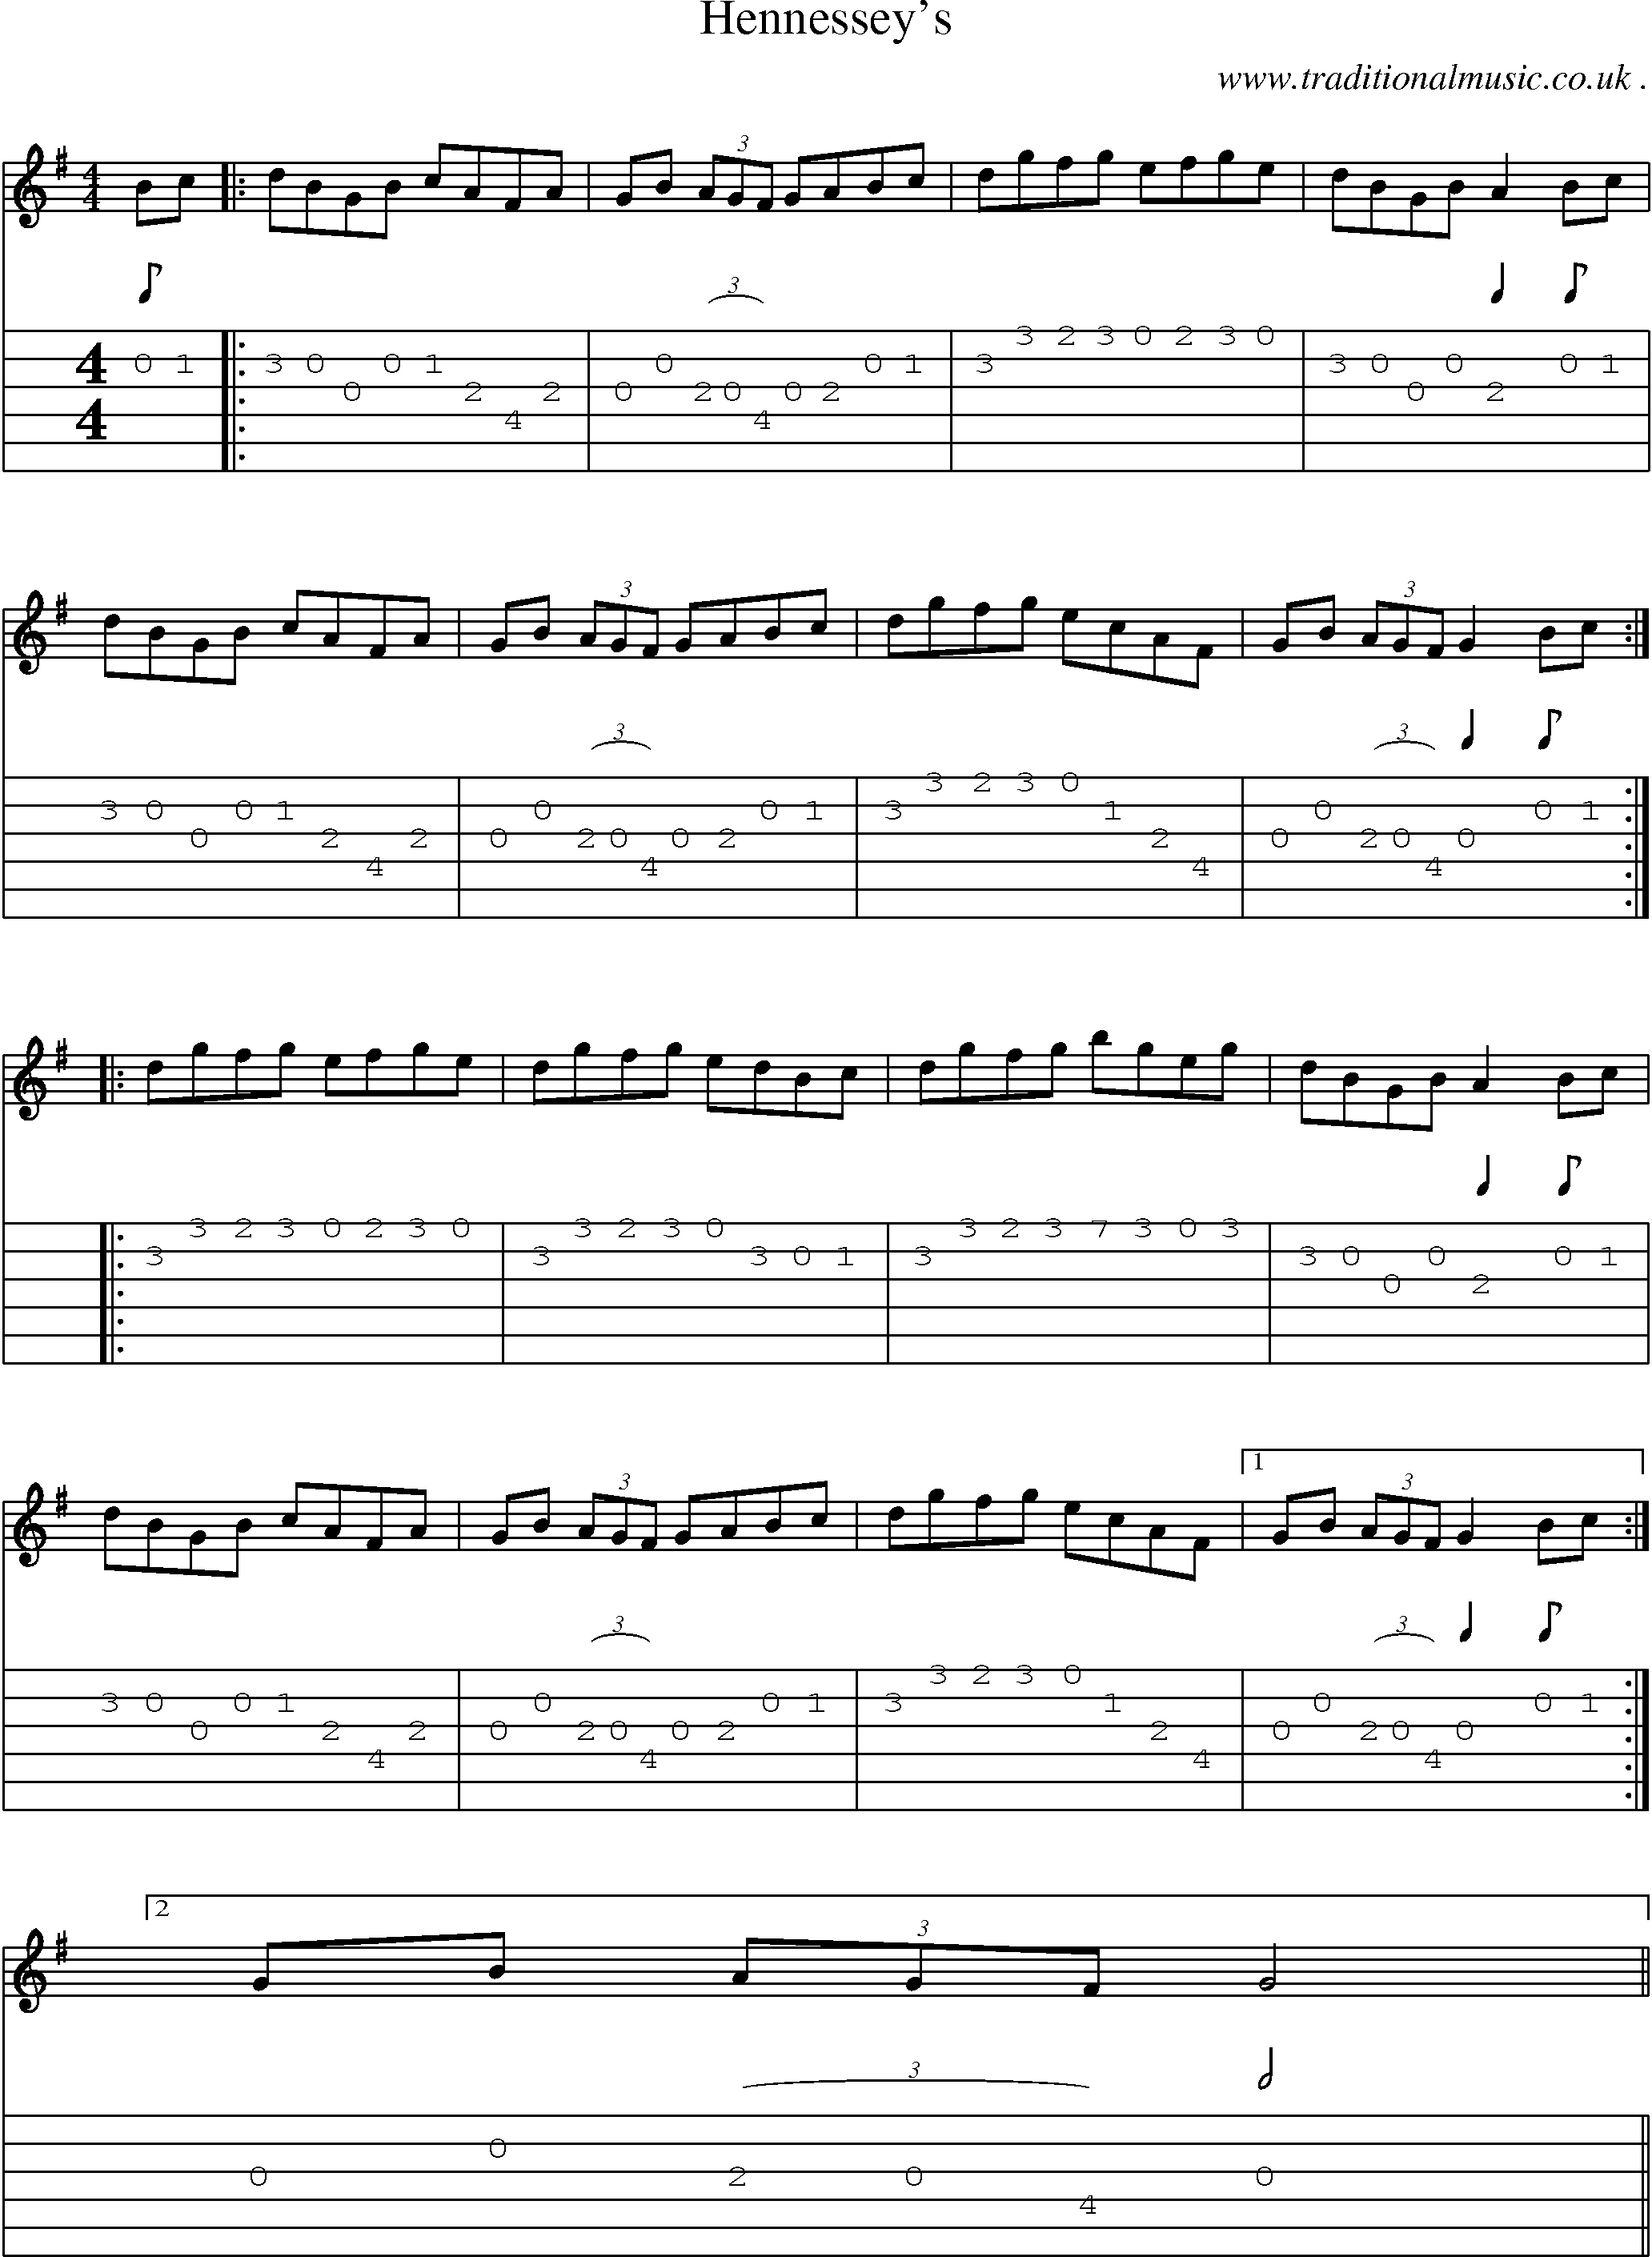 Sheet-Music and Guitar Tabs for Hennesseys